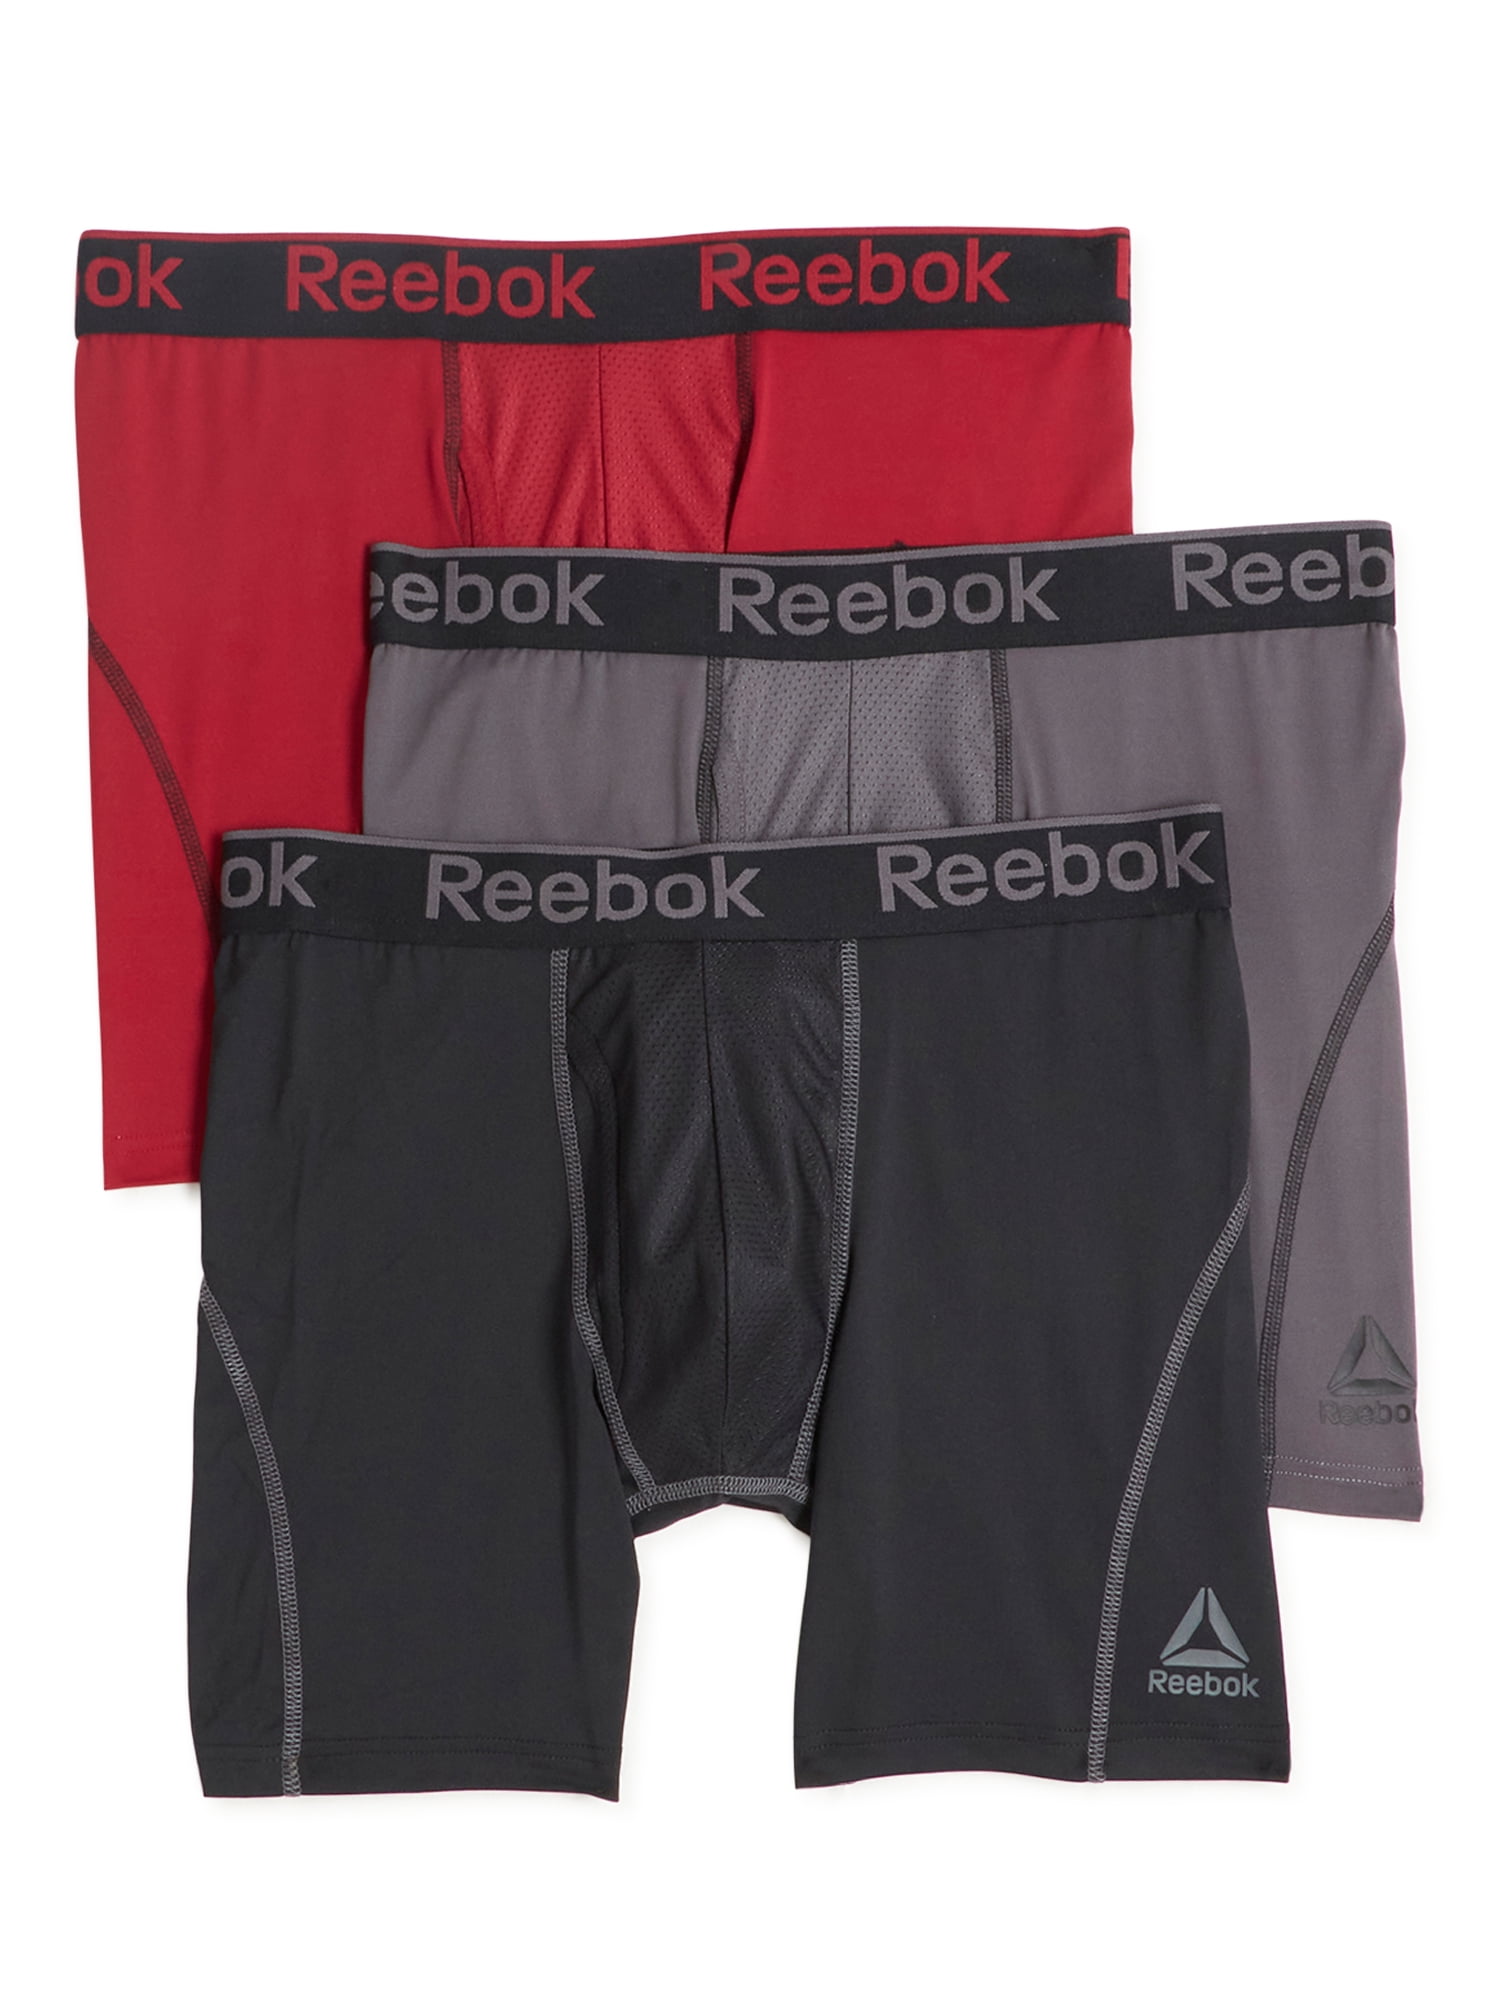 Reebok Men's Pro Series Performance Boxer Brief Extended Length Underwear,  7.5-Inch, 3-Pack 